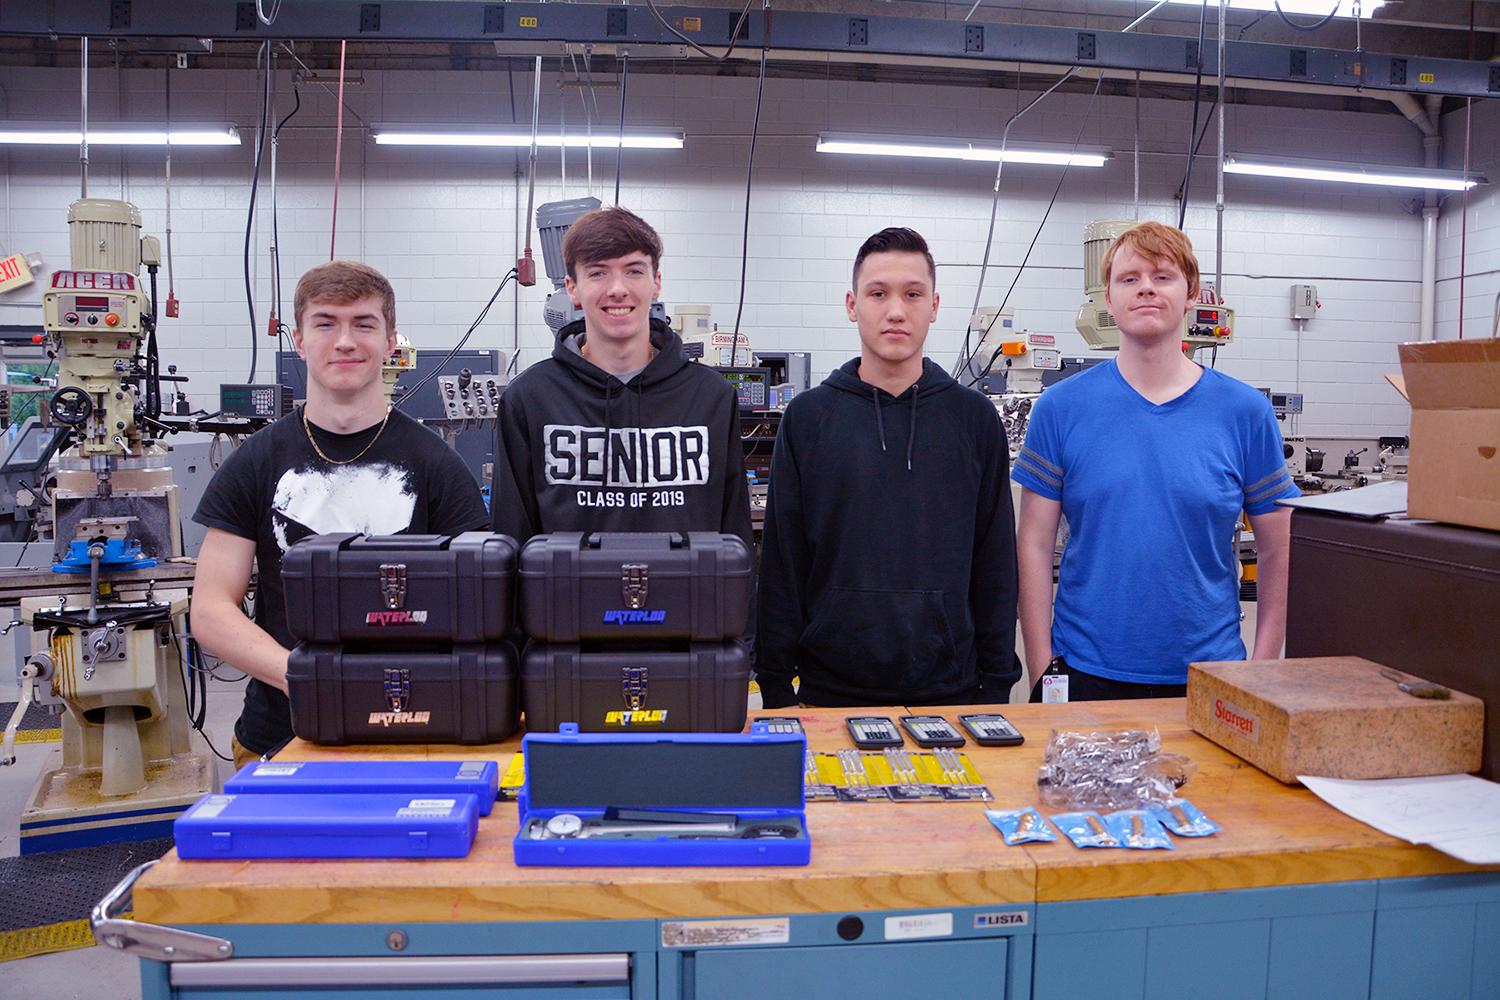 High school students stand with the tool box and tools they received in the machining program.